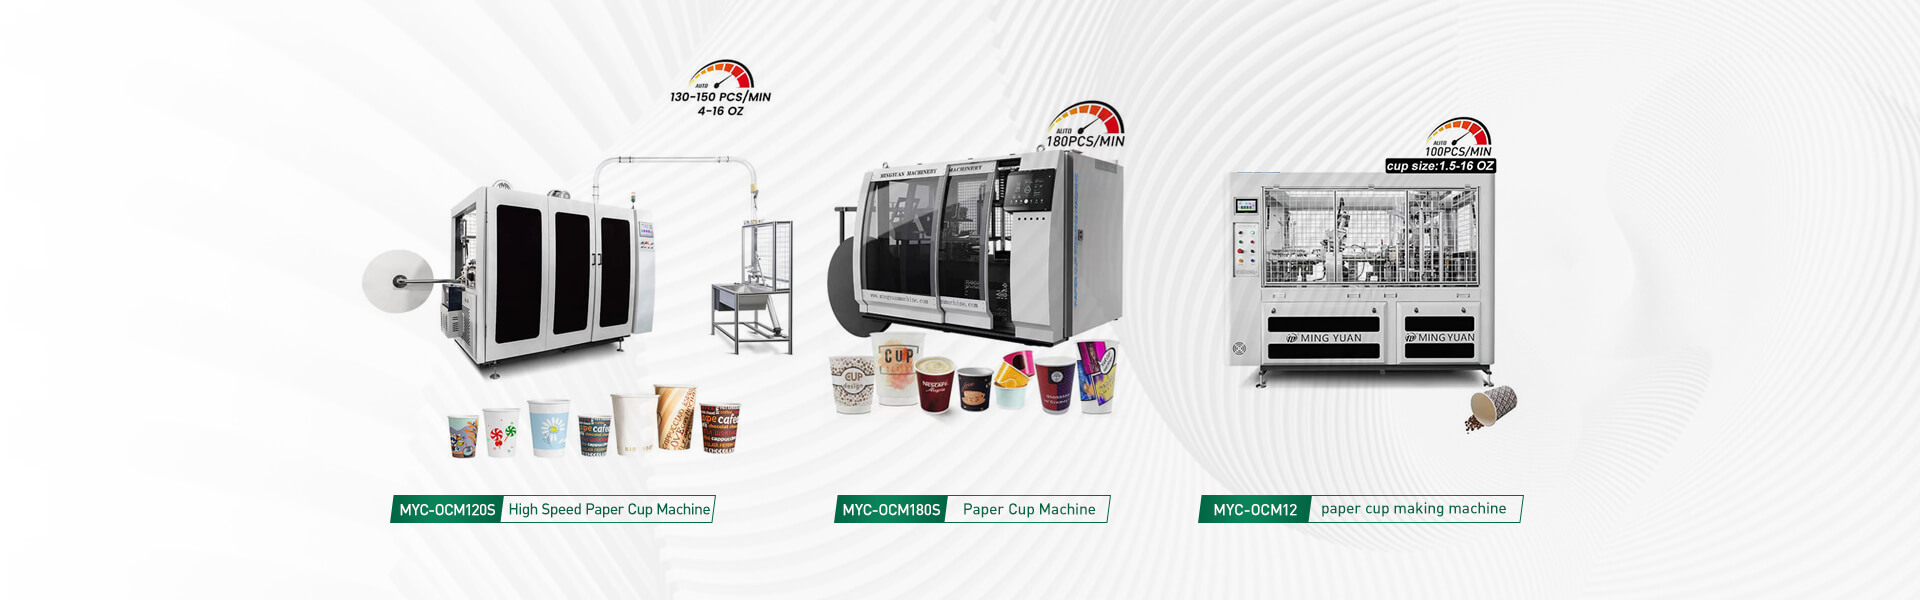 Double Disc Design Ultrasonic Paper Cup Machine Main Features